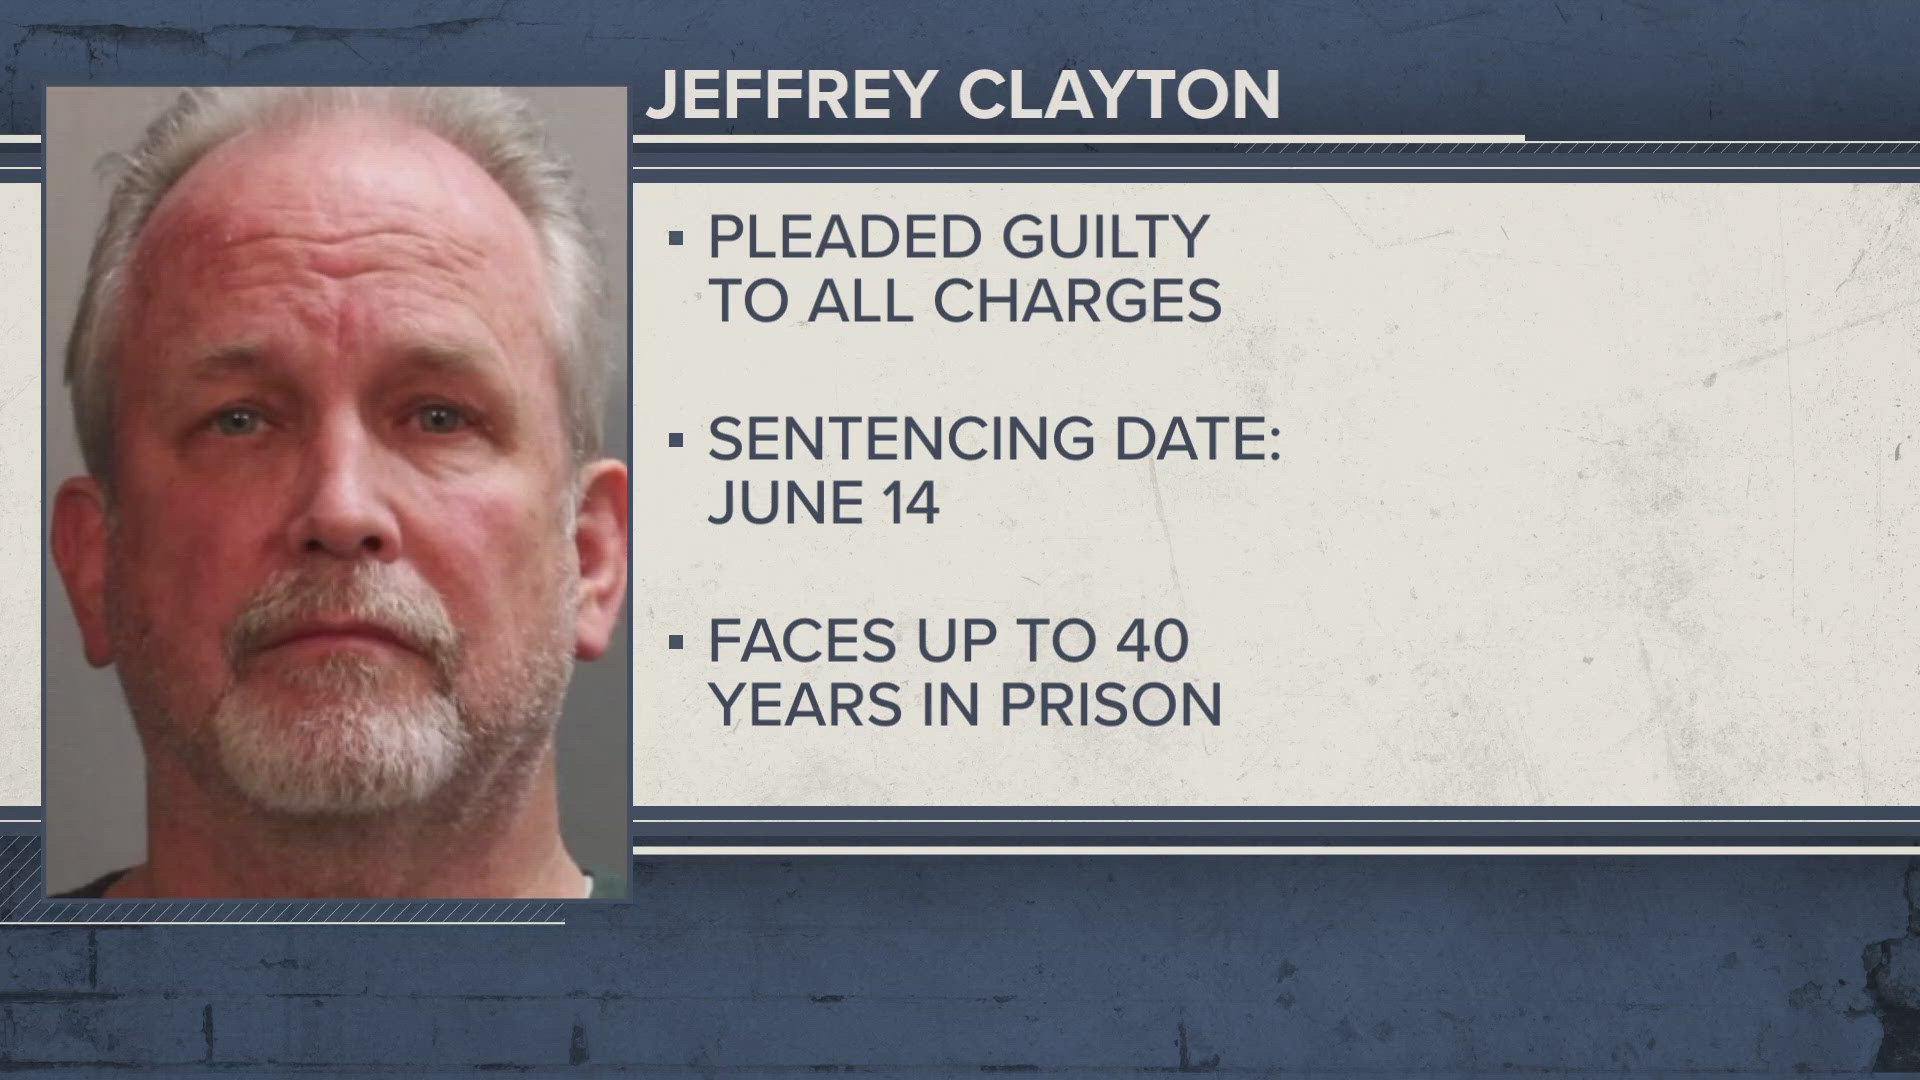 Jeffrey Clayton, 66, pleaded guilty Wednesday to four charges related to inappropriate conduct with student as he will be sentenced June 14. He faces up to 40 years.